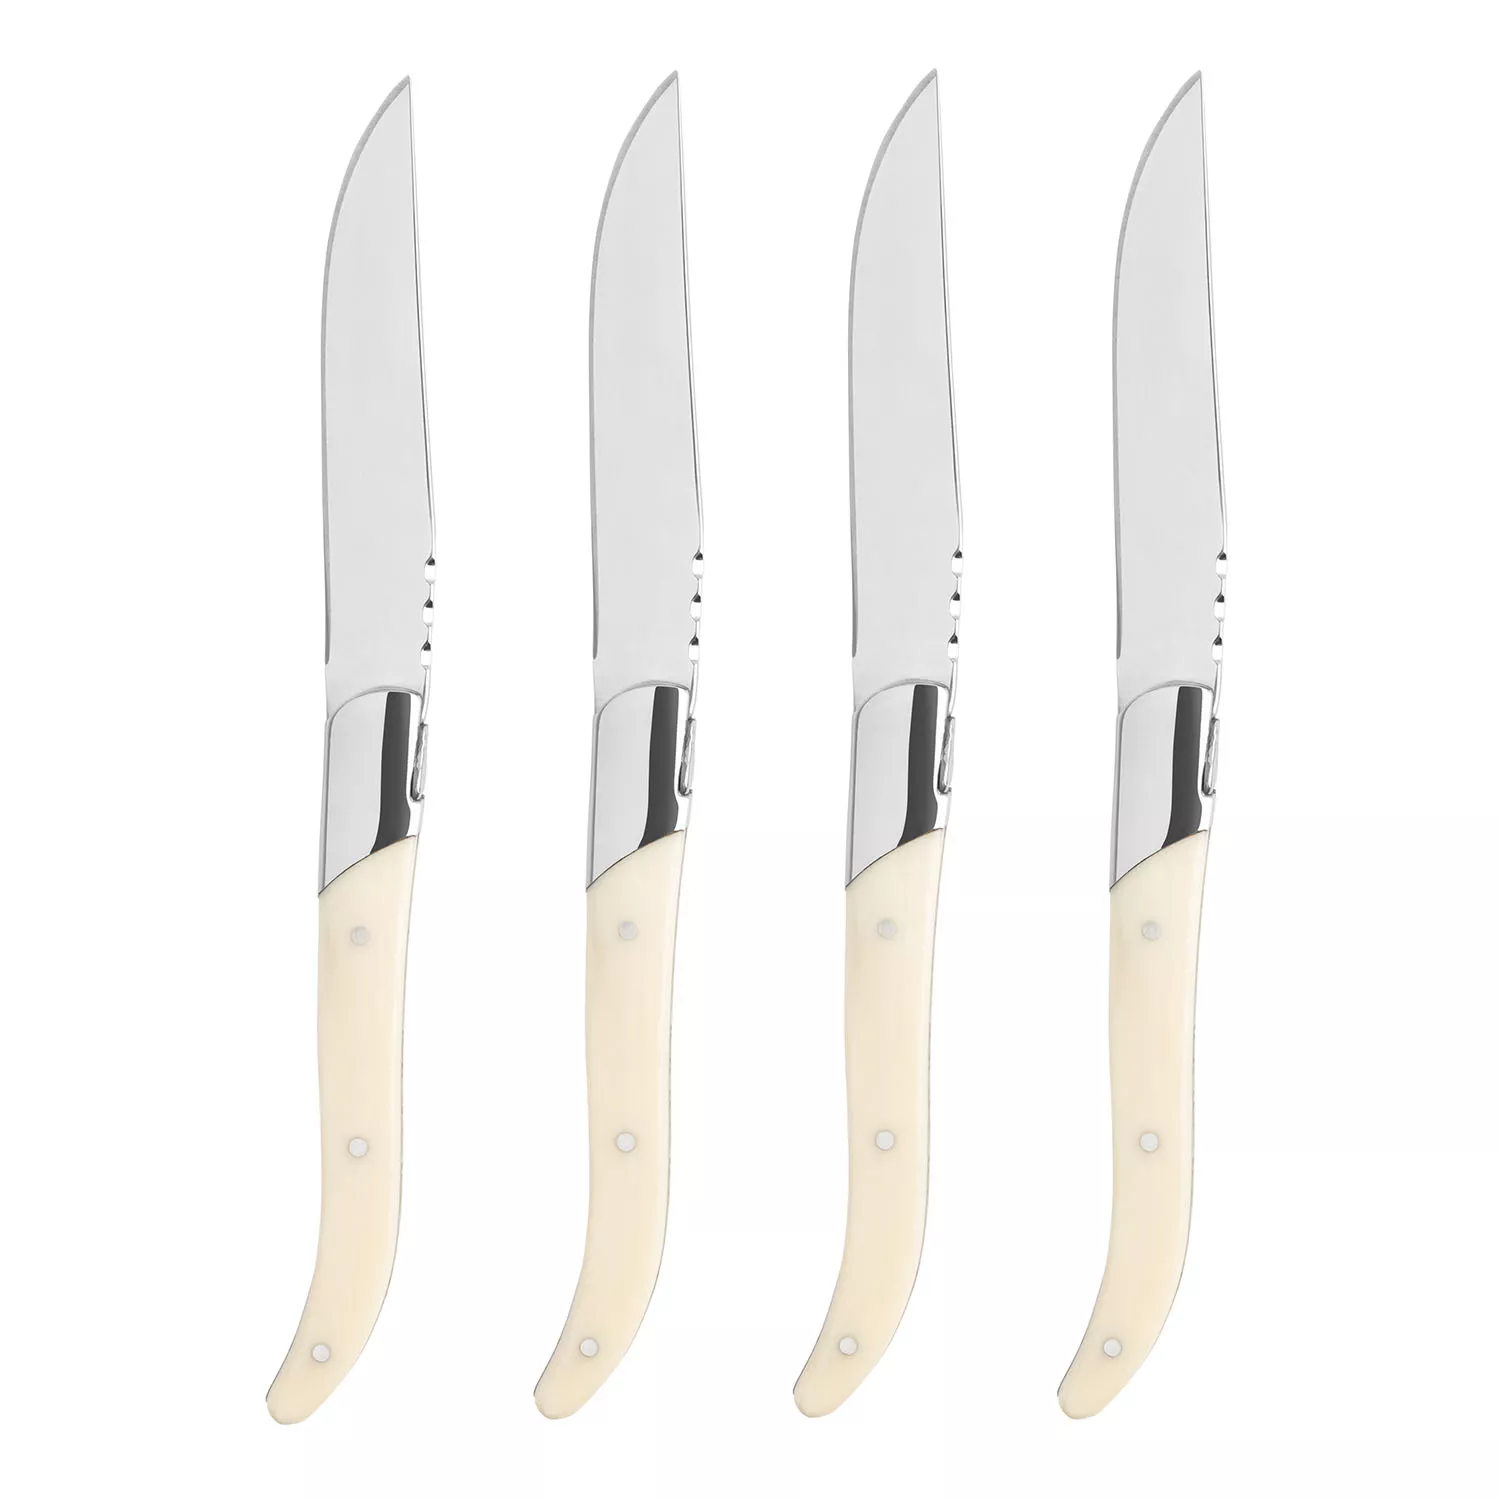 French Home Laguiole Connoisseur Steak Knives with Faux Ivory Handles, Set of 4